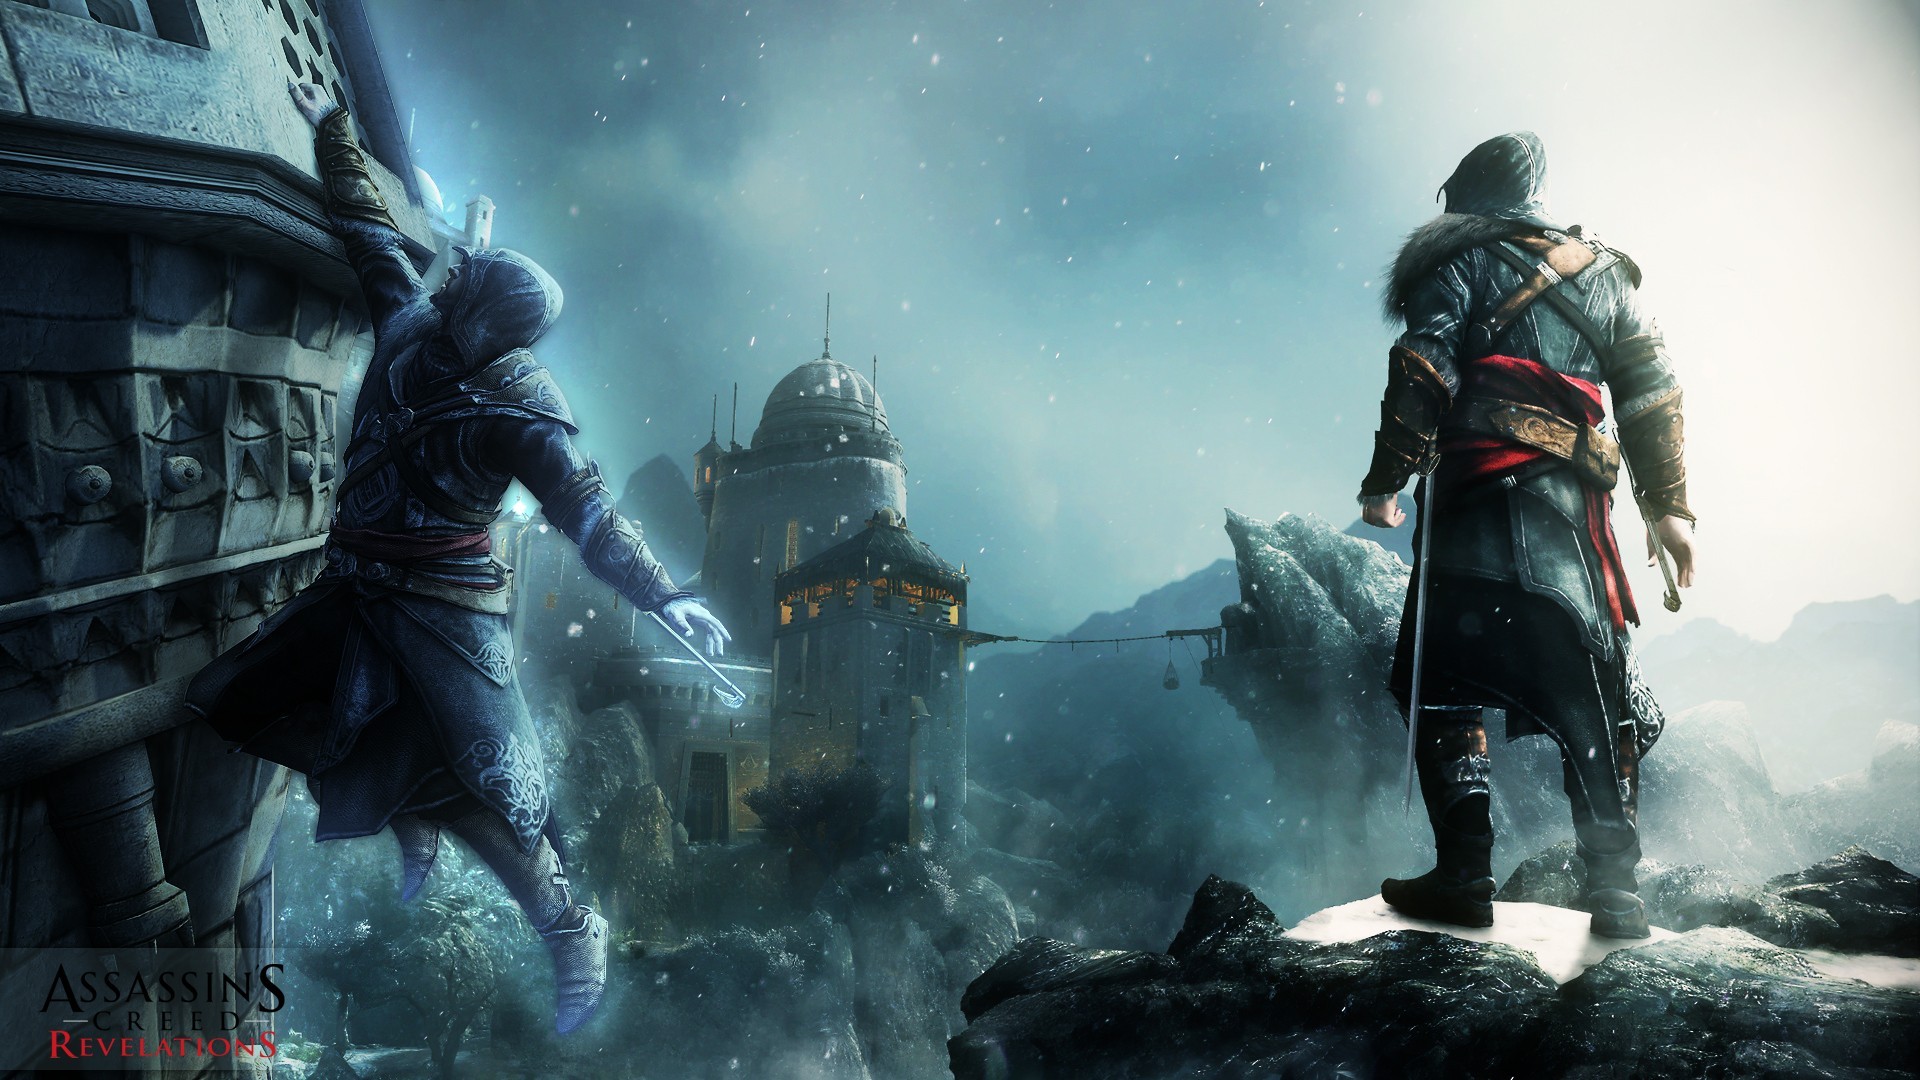 assassin's creed revelations wallpaper,action adventure game,pc game,strategy video game,adventure game,cg artwork